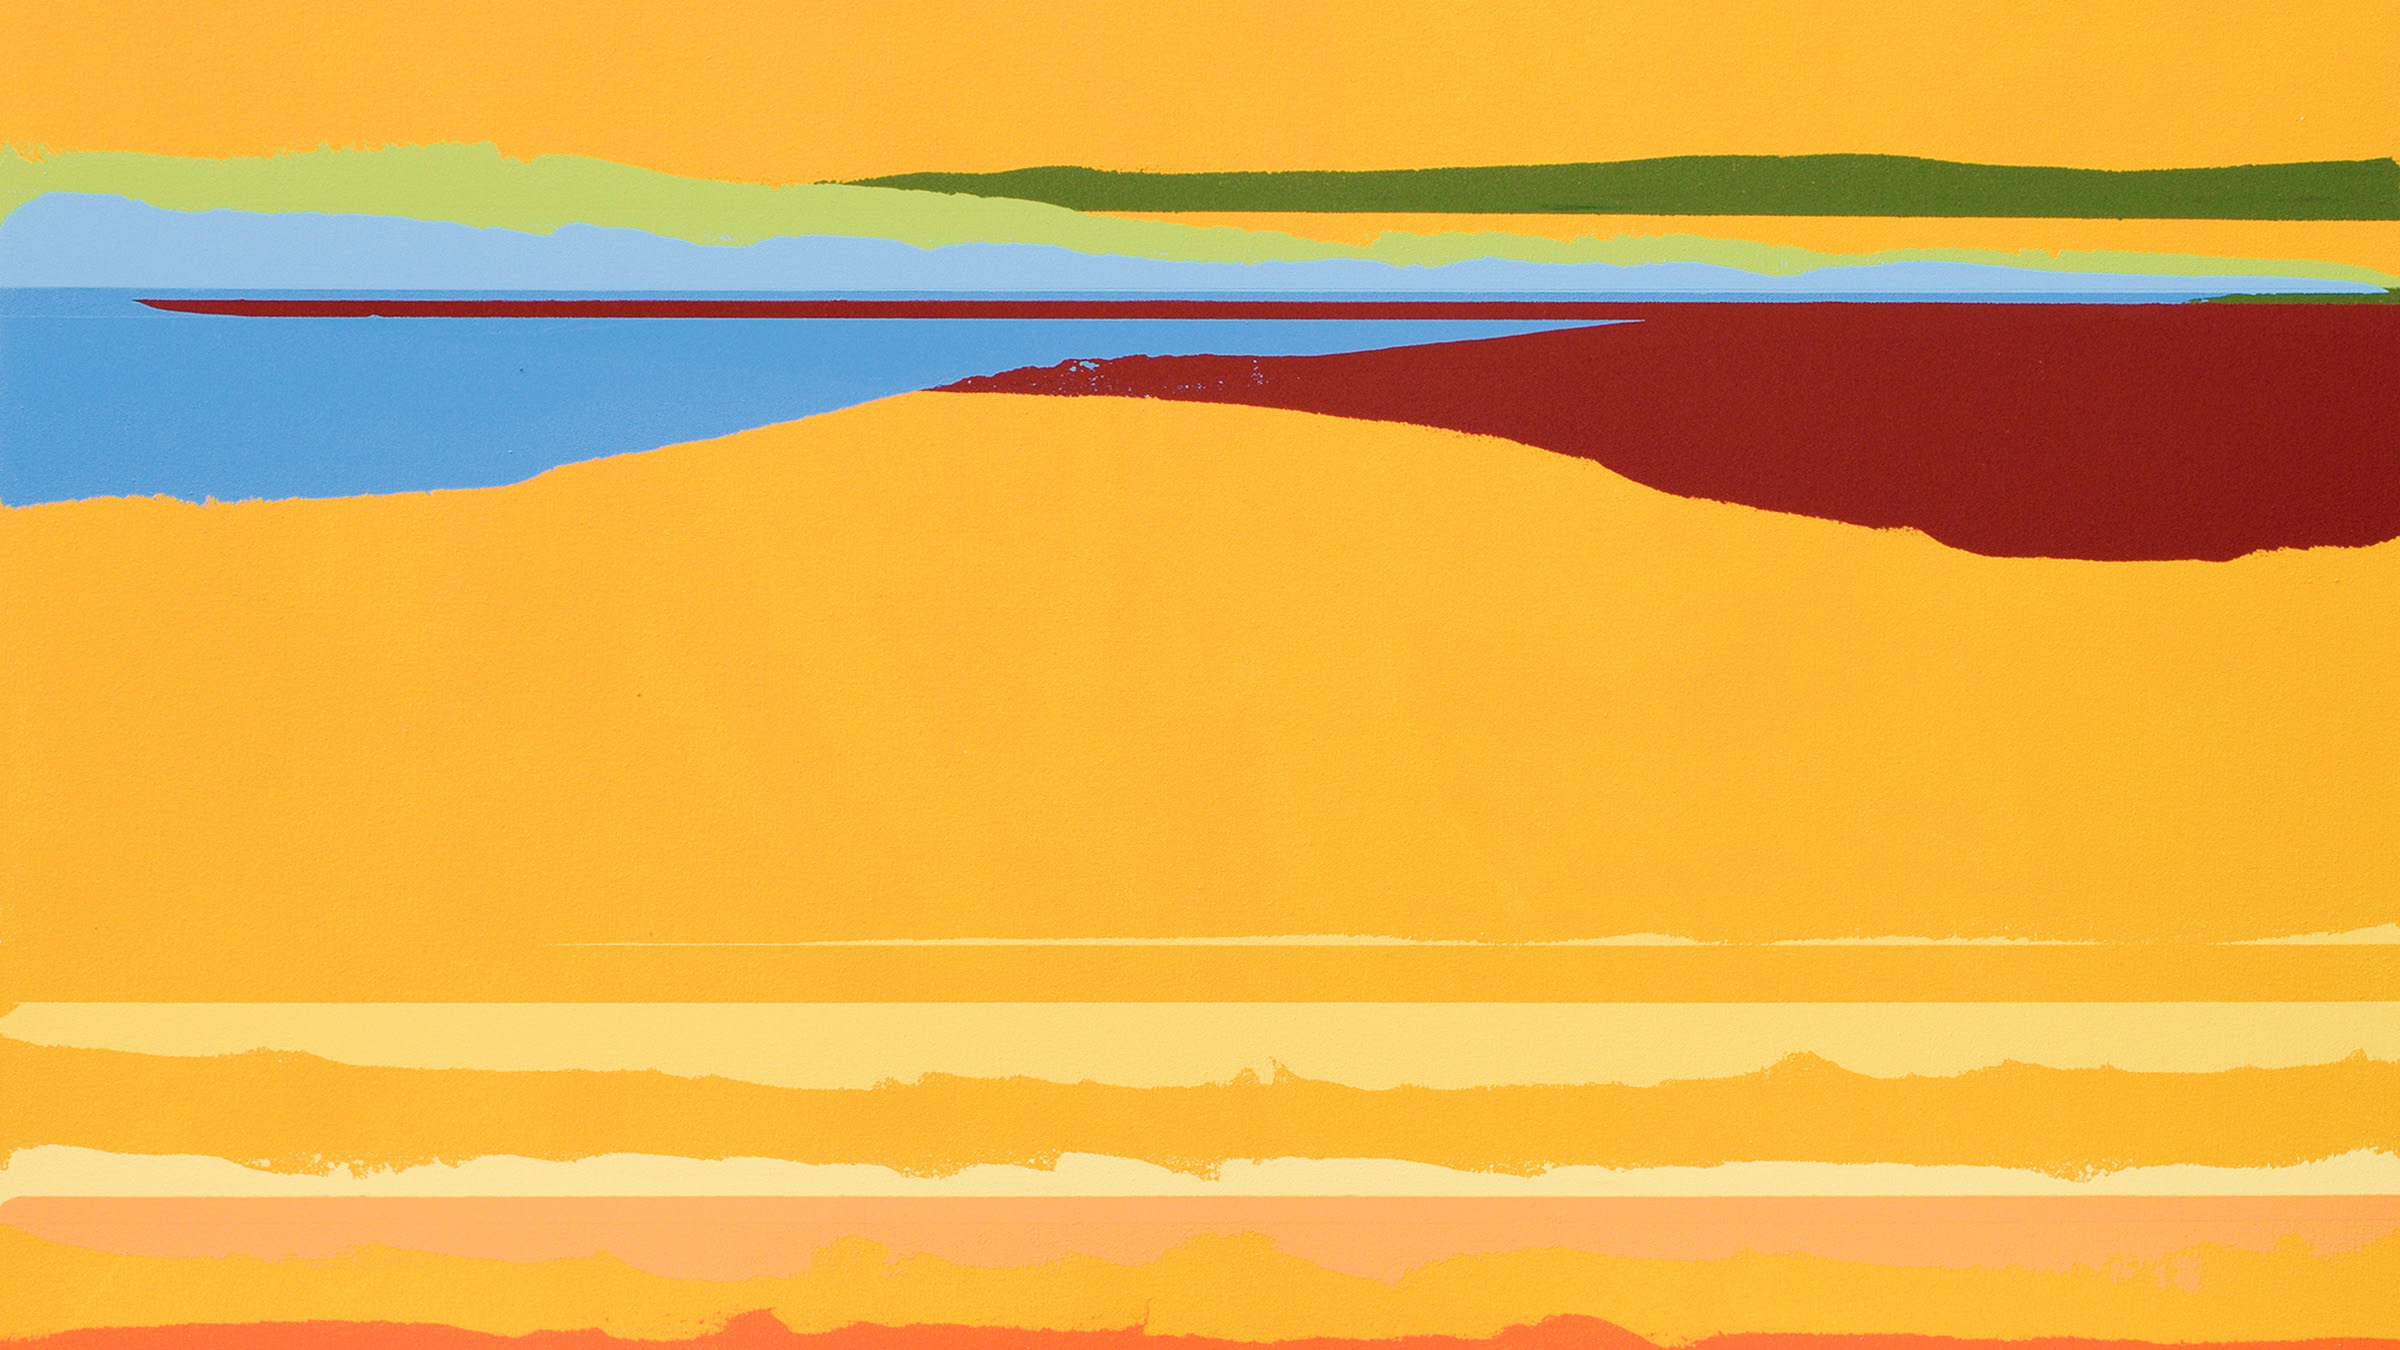 A painting with undulating horizontal bands of colors that resemble an abstracted landscape– a large block of yellow, several stripes of lighter yellow, reddish brown, sky blue, and a thin band of grass green.